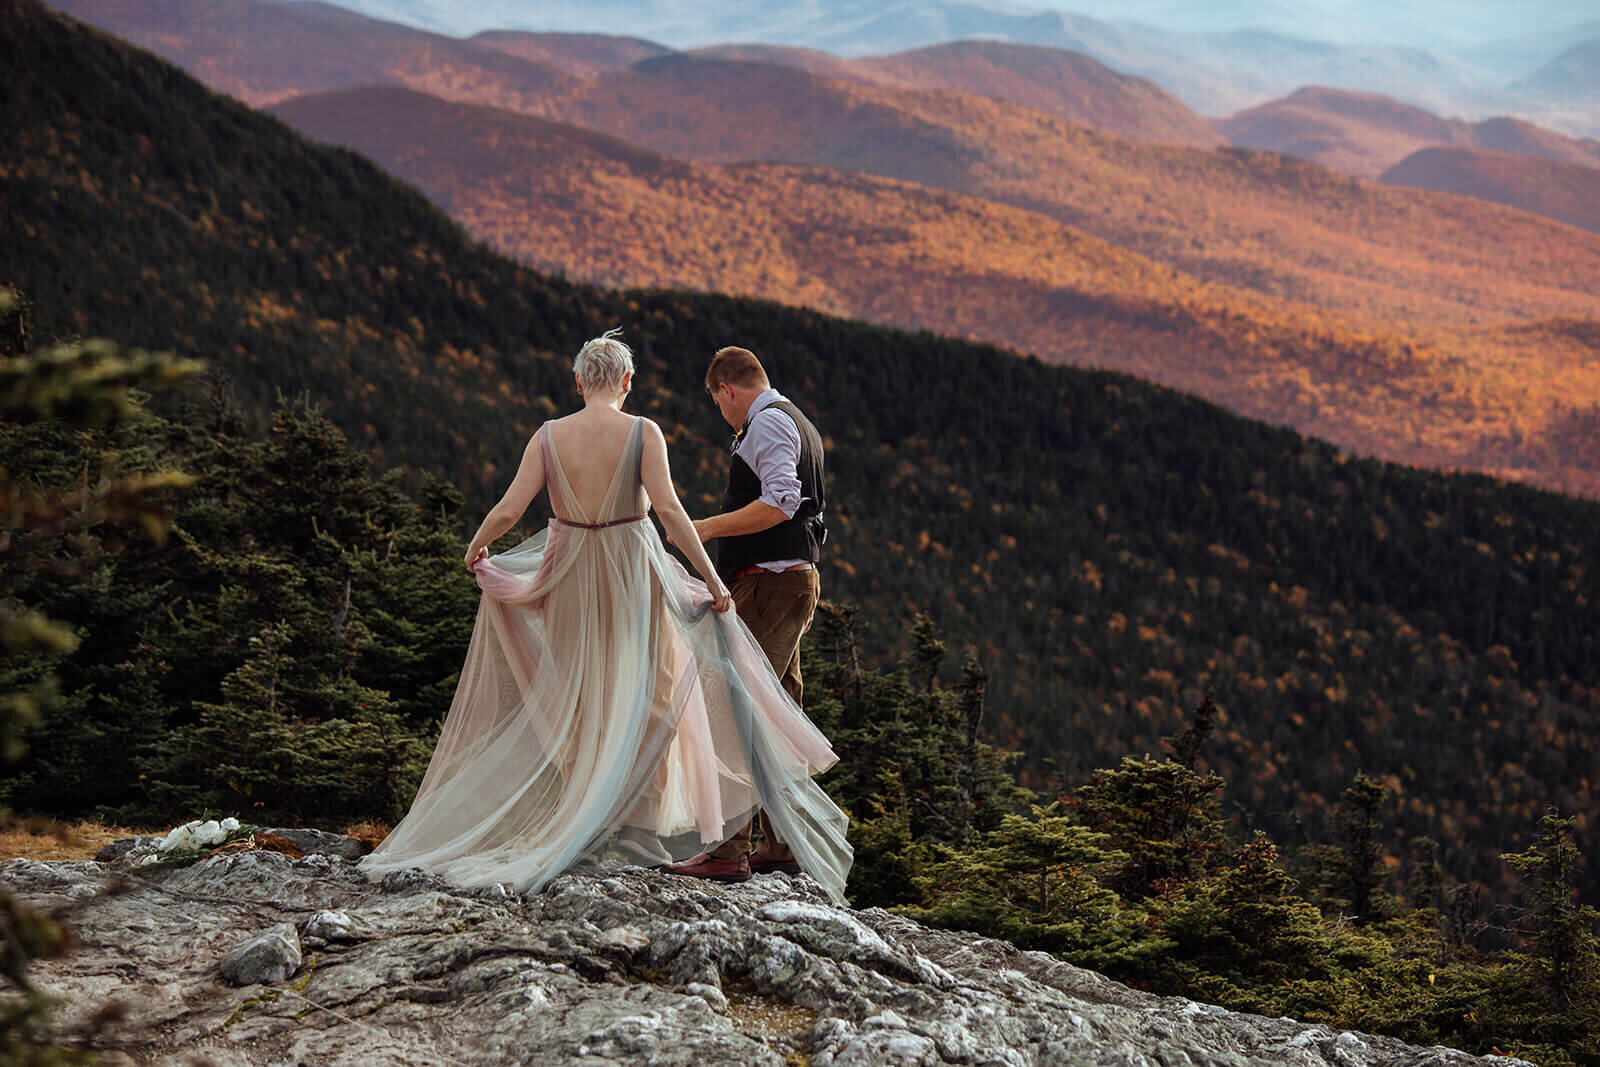  Brides dress flows in the wind  as she and the groom hike along summit of Mt. Mansfield near Stowe, Vermont after their elopement 